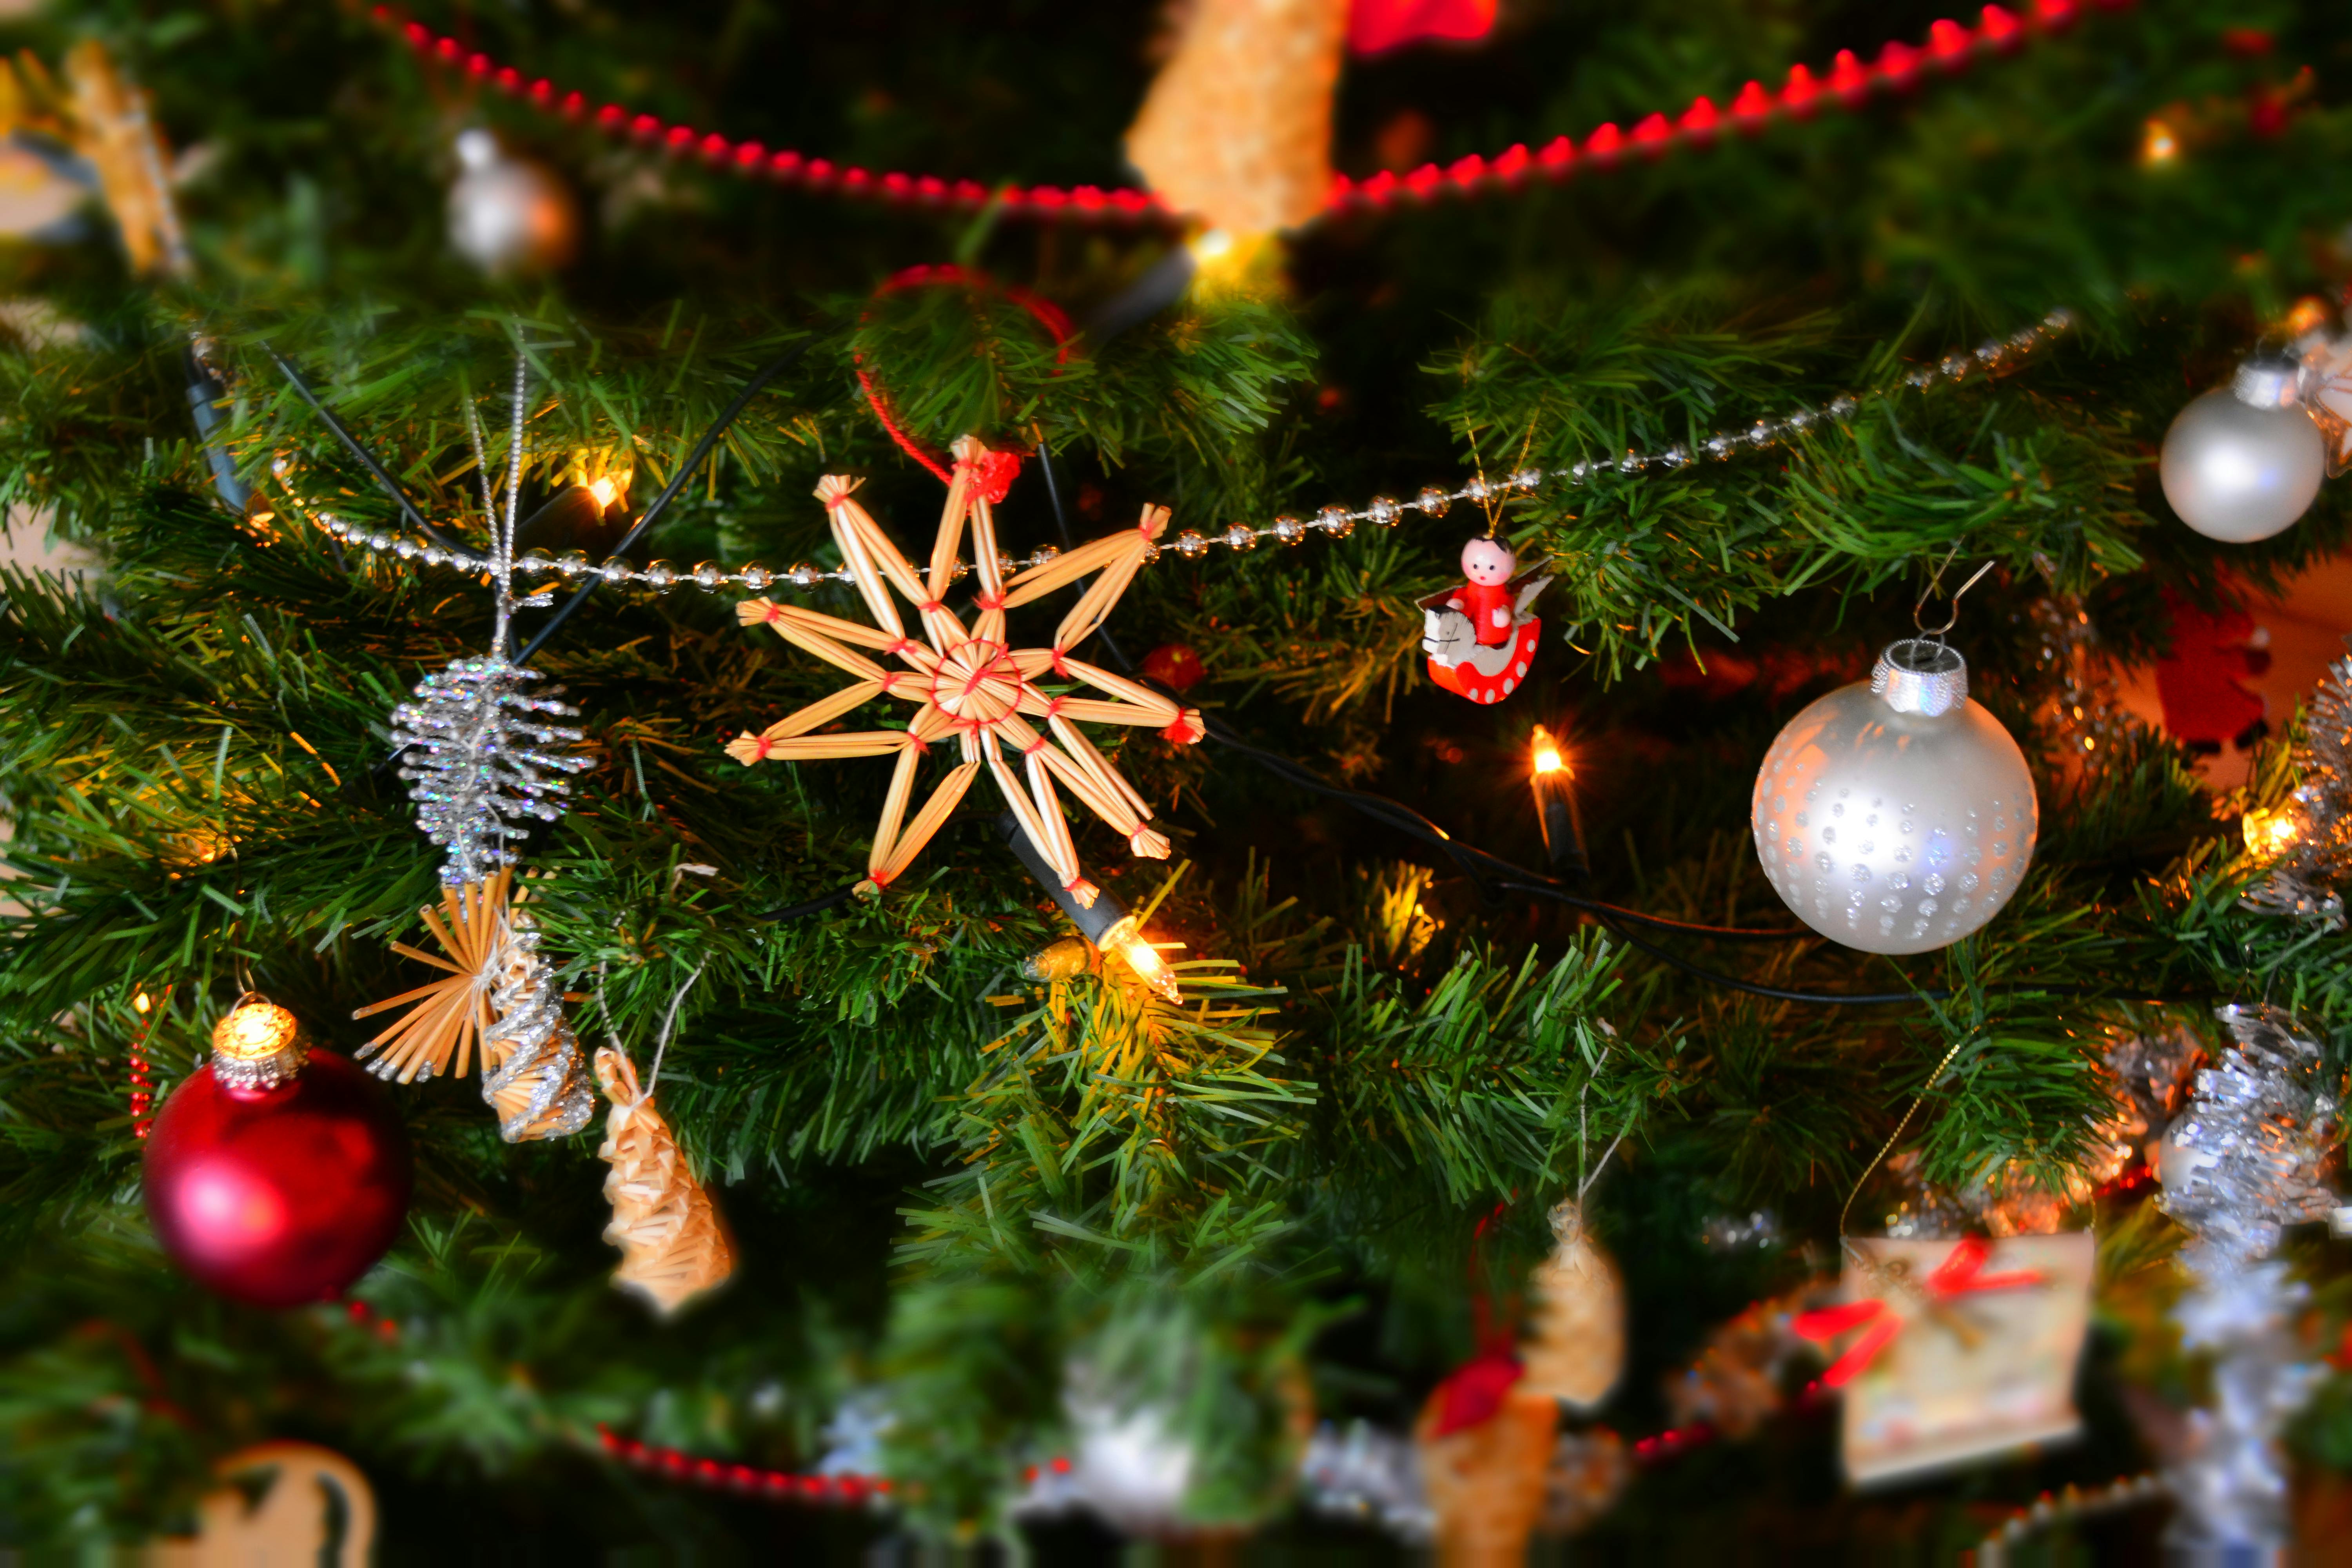 Christmas Images Pexels Free Stock Photos